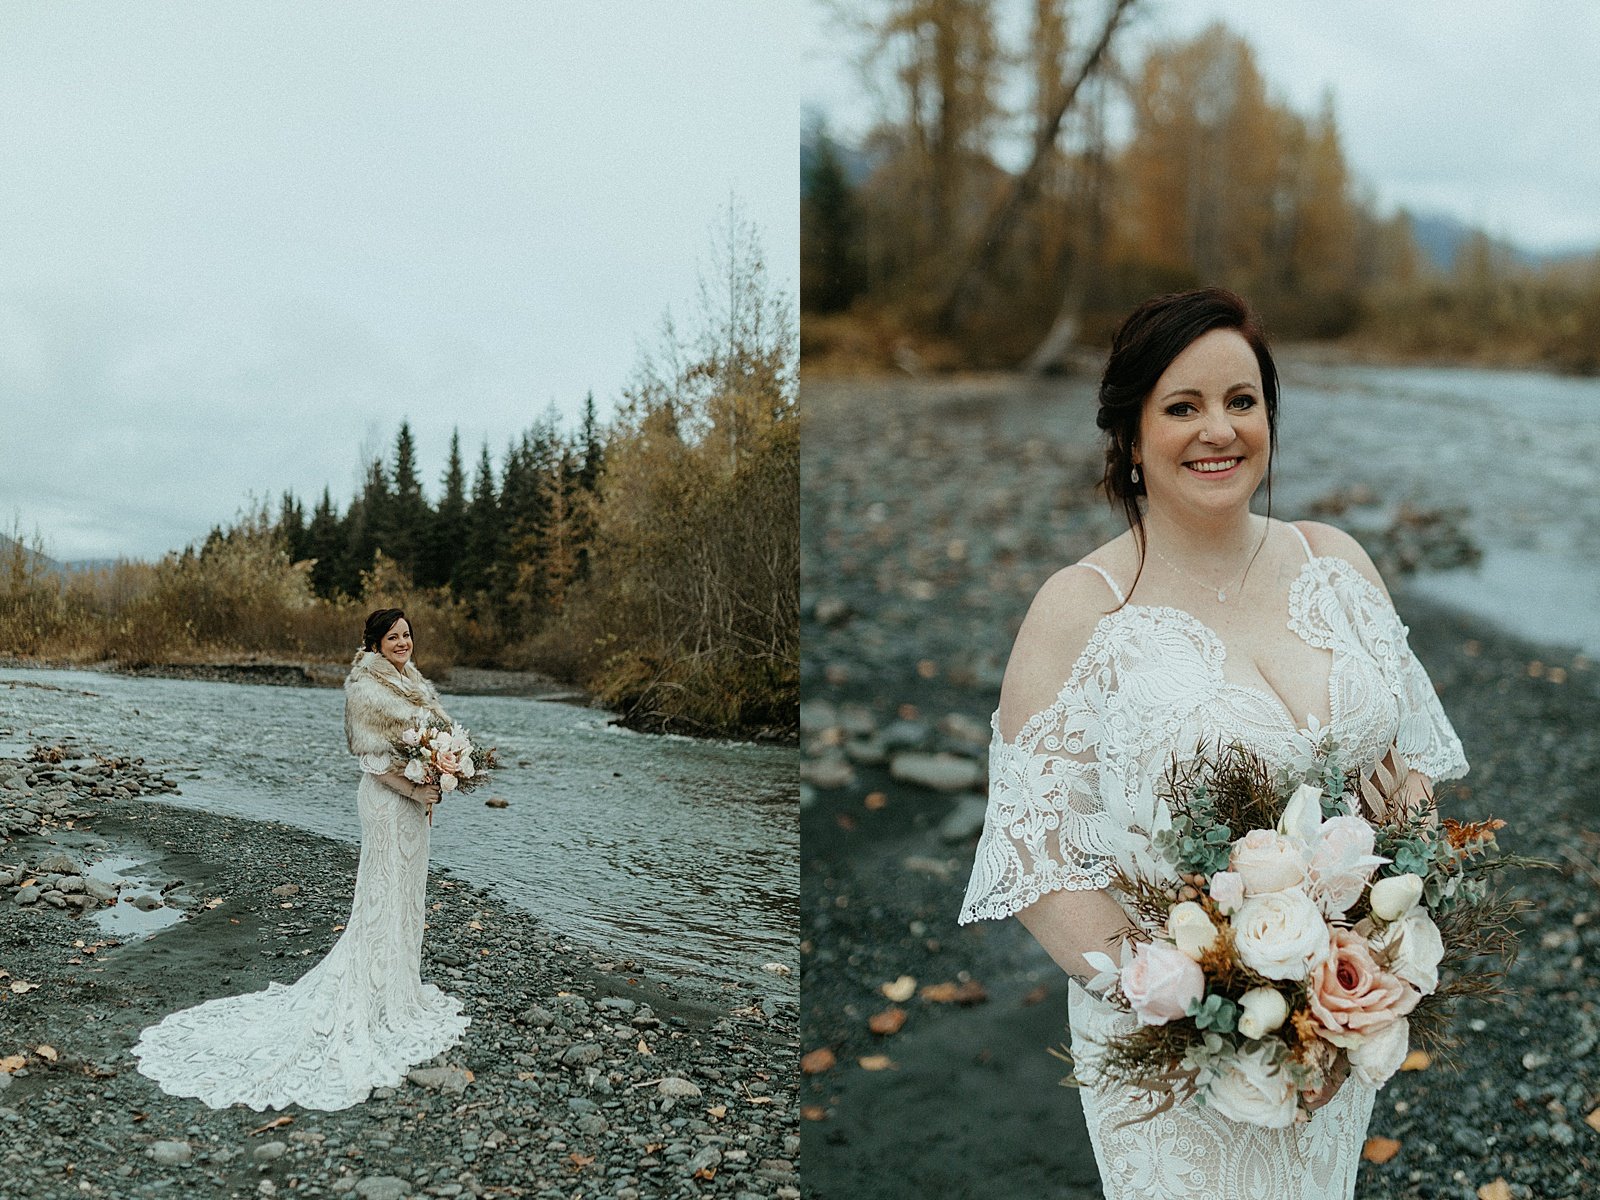  Bride with long train dress by a river in Alaska holding a large bouquet of flowers 